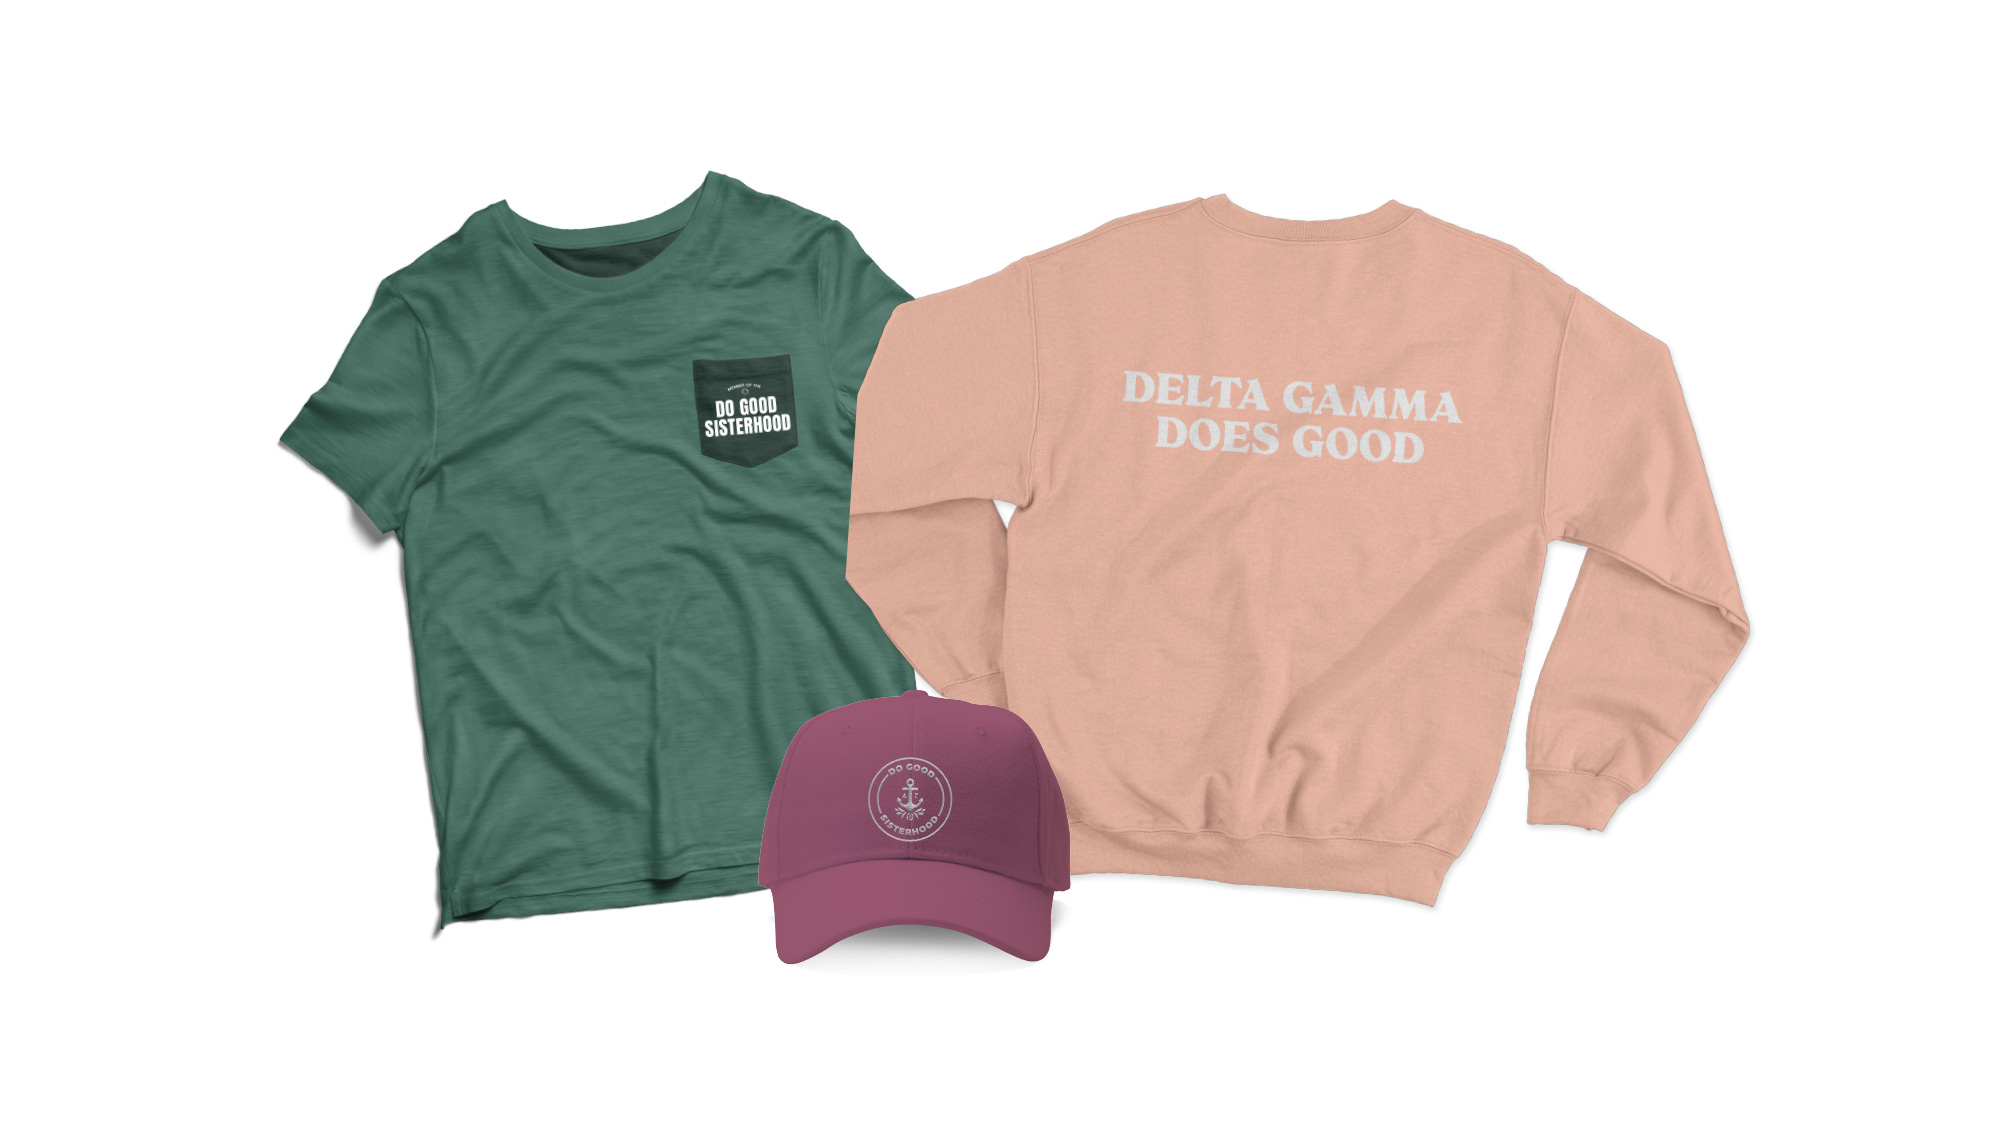 New Logo and Identity for Delta Gamma by Ologie